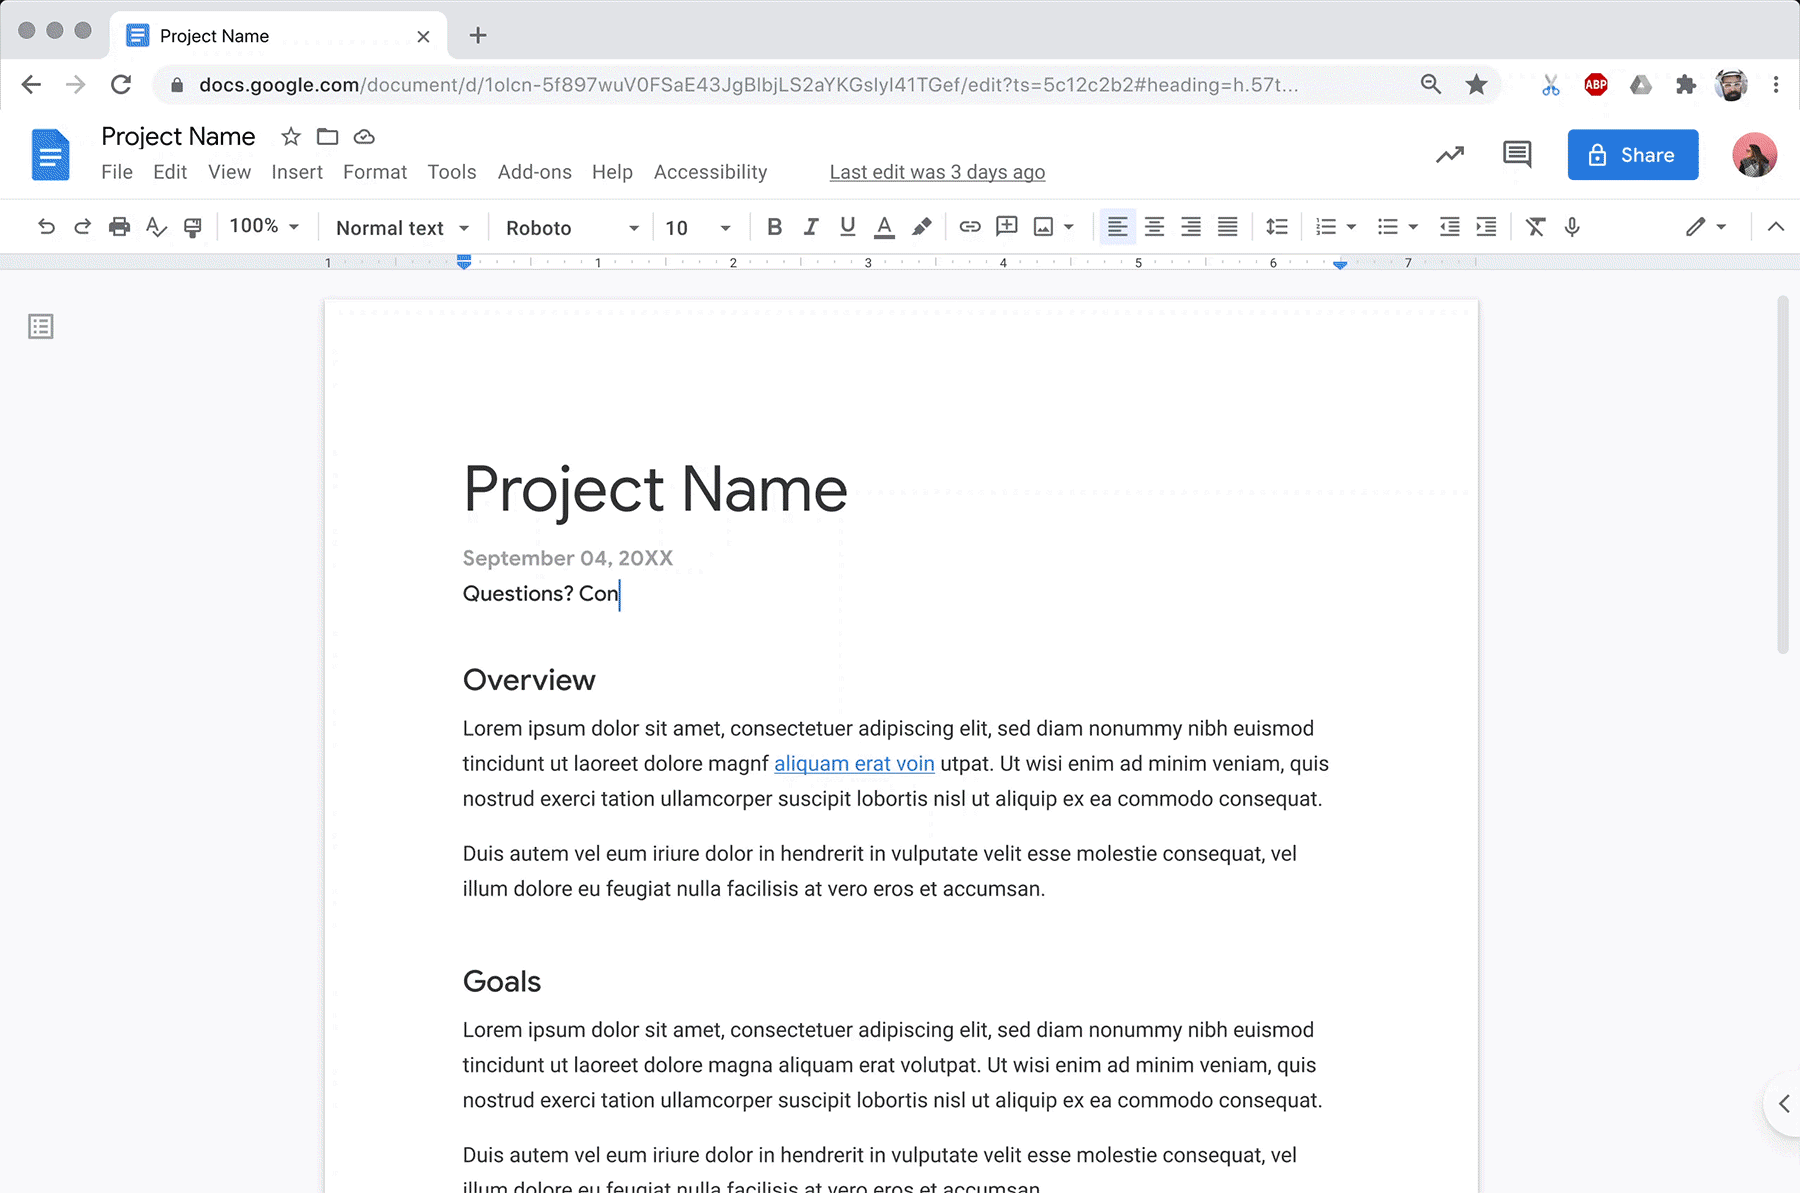 GIF of a Google Doc with someone typing a user's name into the document, which then leads to a Google Slides presentation.